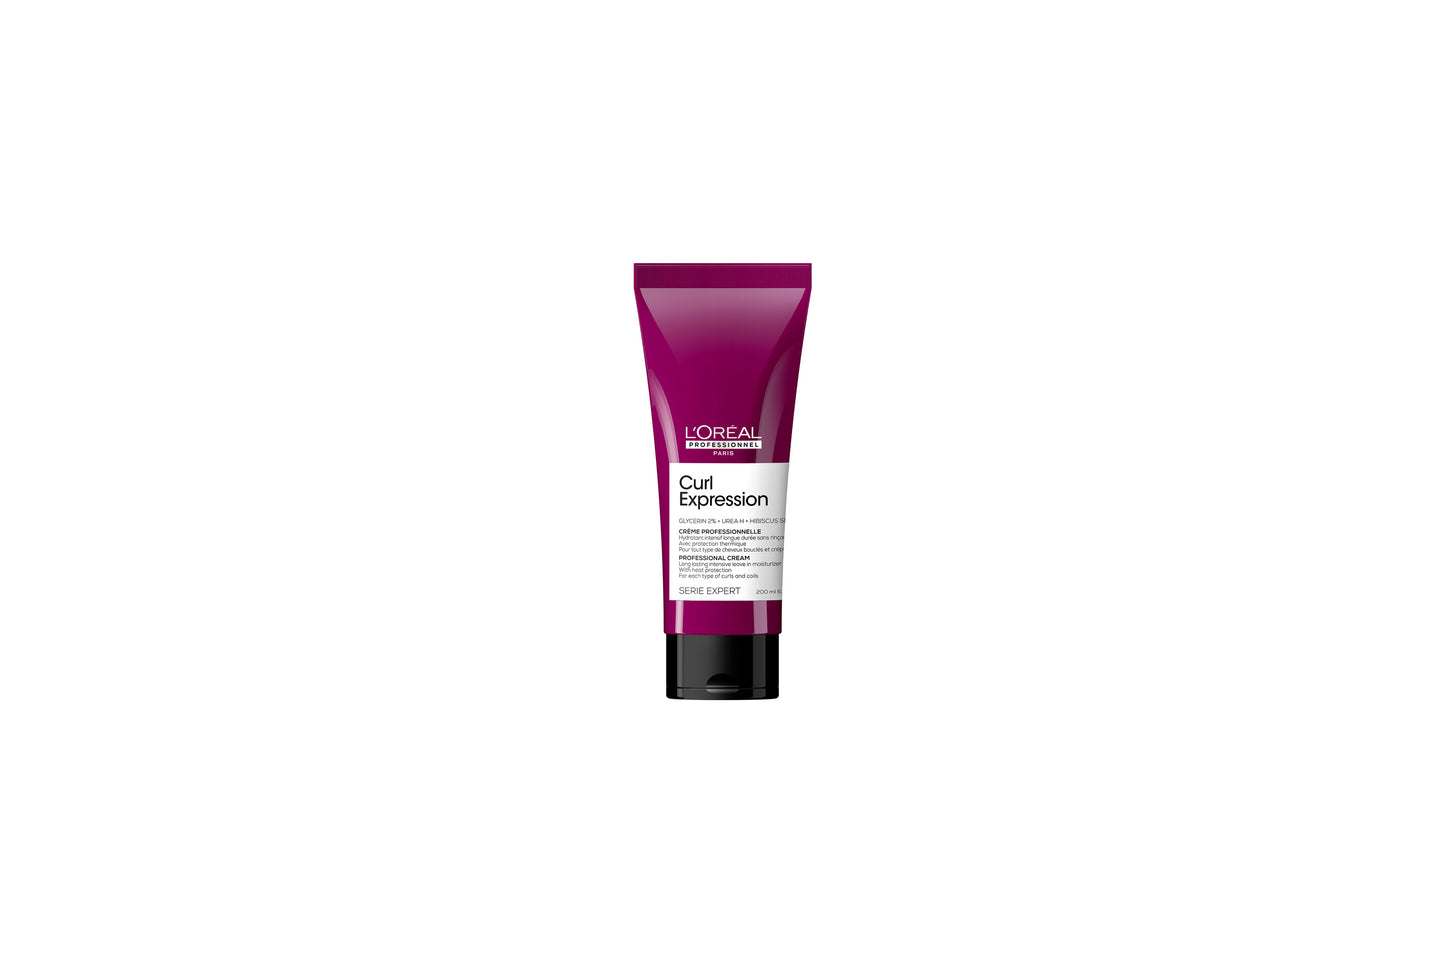 L'Oreal Curl Expression Long-Lasting Leave In Moisturiser For Curls & Coils 200ml